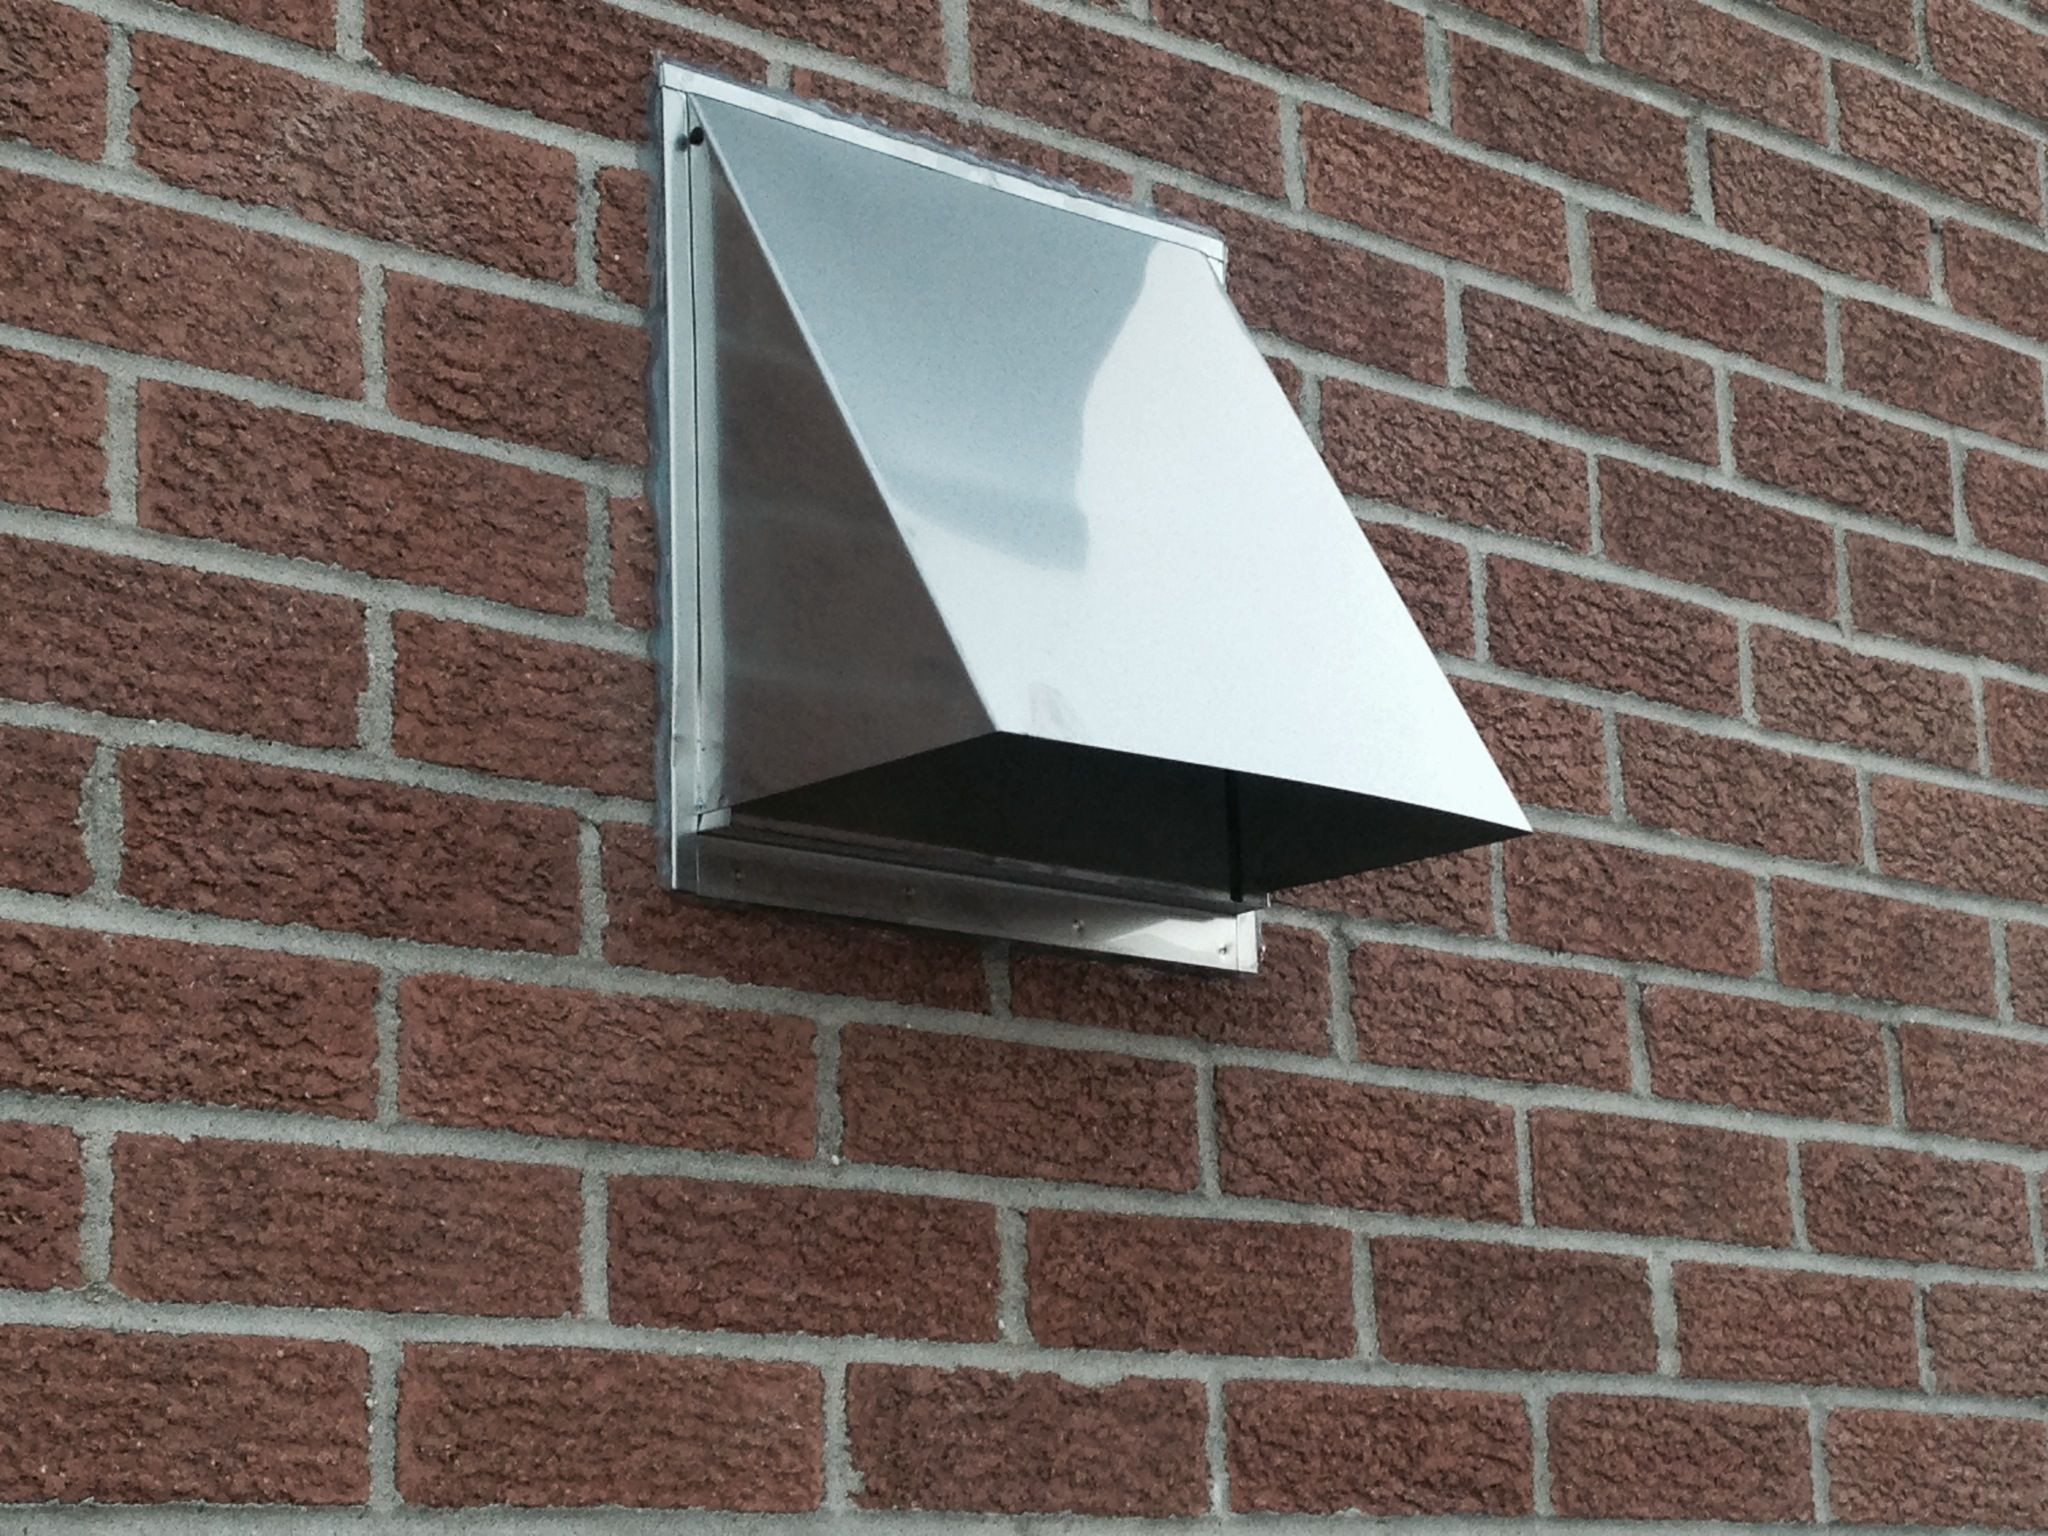 Bathroom Exhaust Fan Exterior Cover
 Exterior Wall Vent Covers